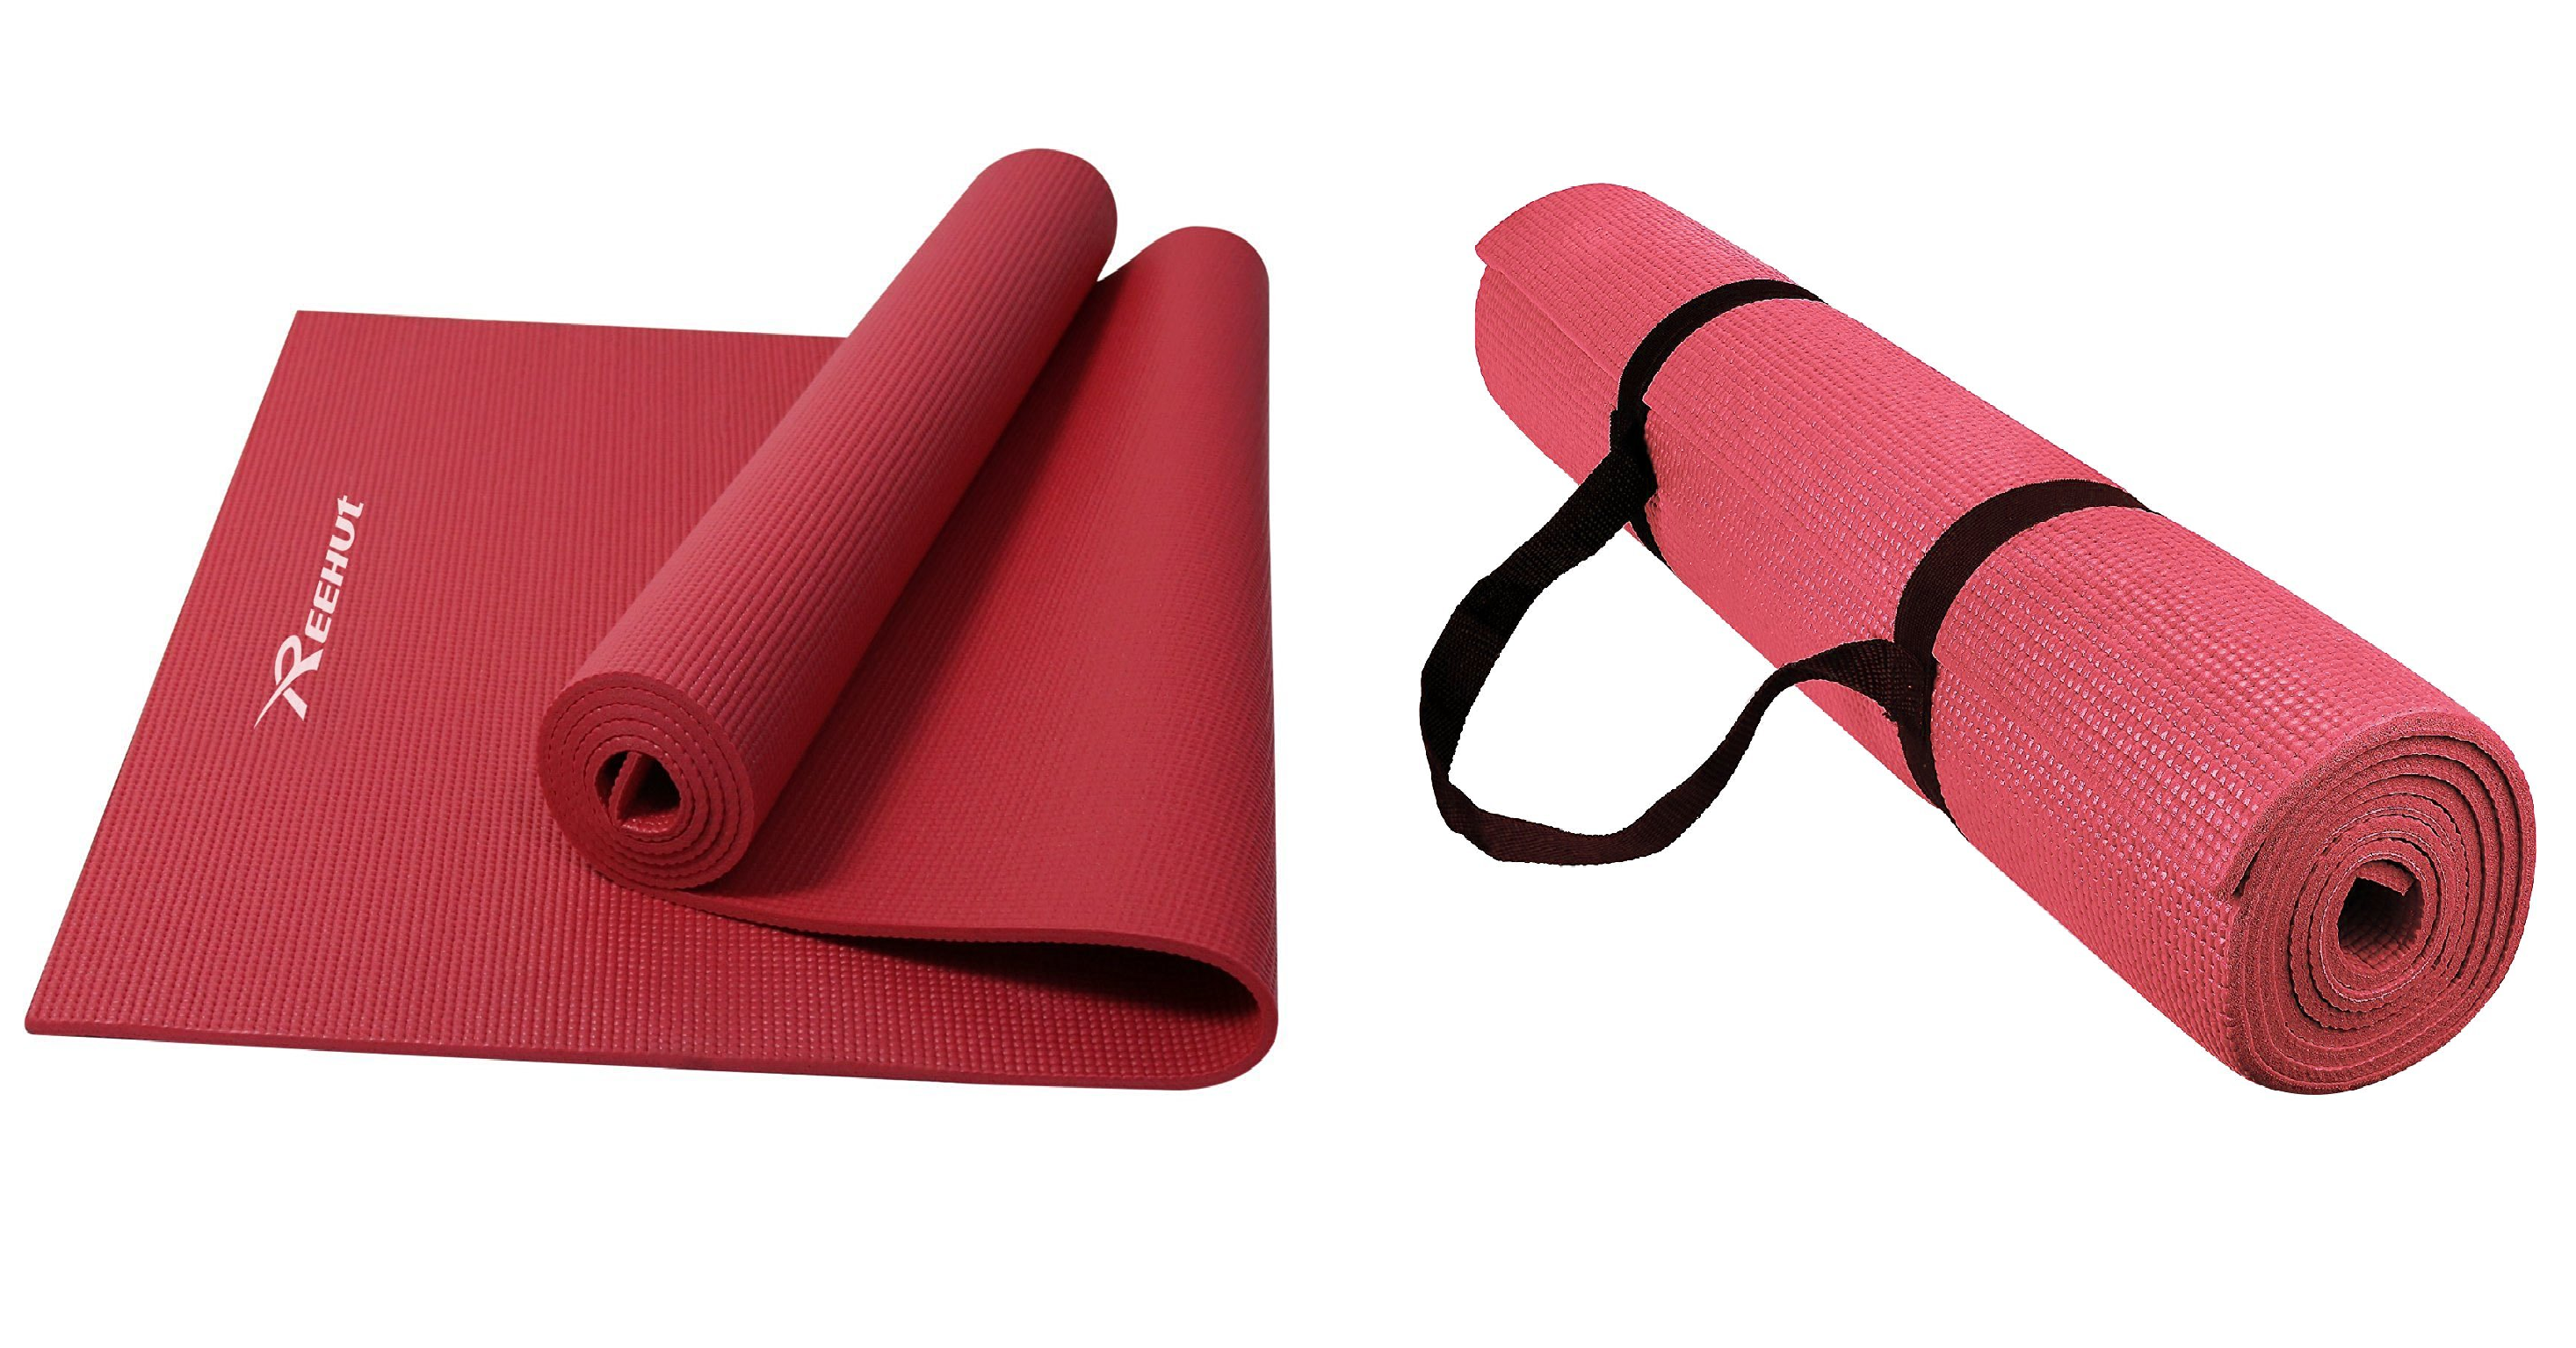 Reehut 1/4-Inch High Density Exercise Yoga Mat with Carrying Strap Only $14.99! (Reg $25.99)